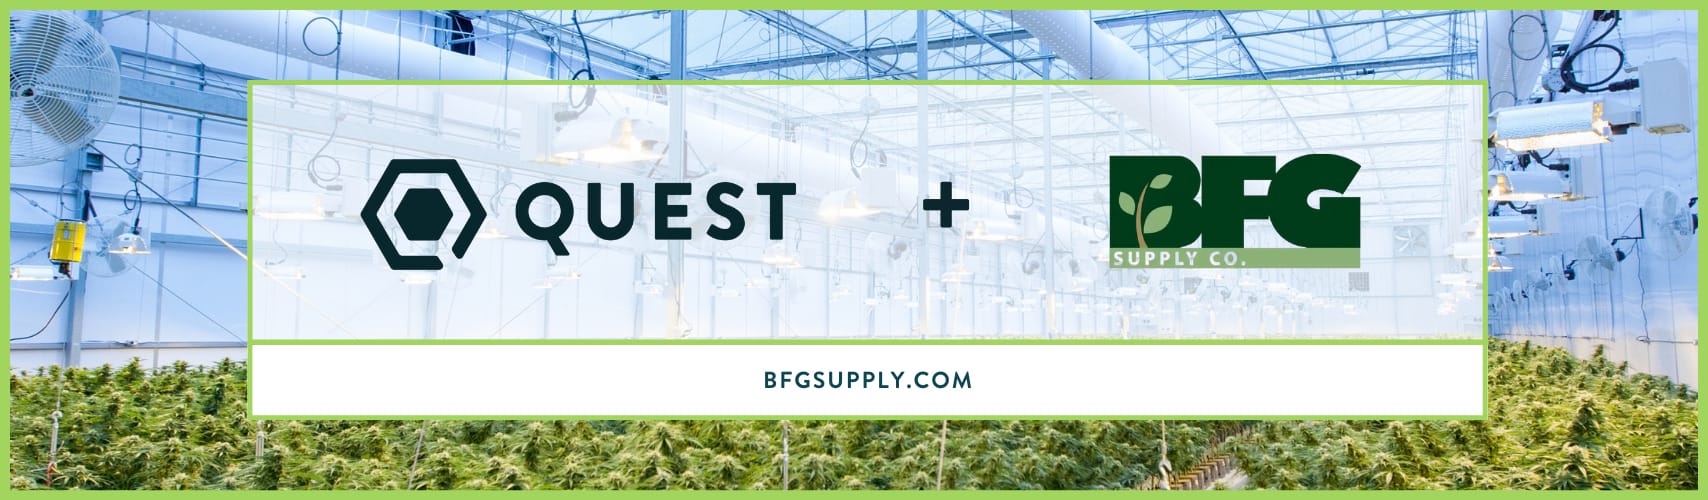 Quest + BFG Supply in front of a greenhouse cultivation